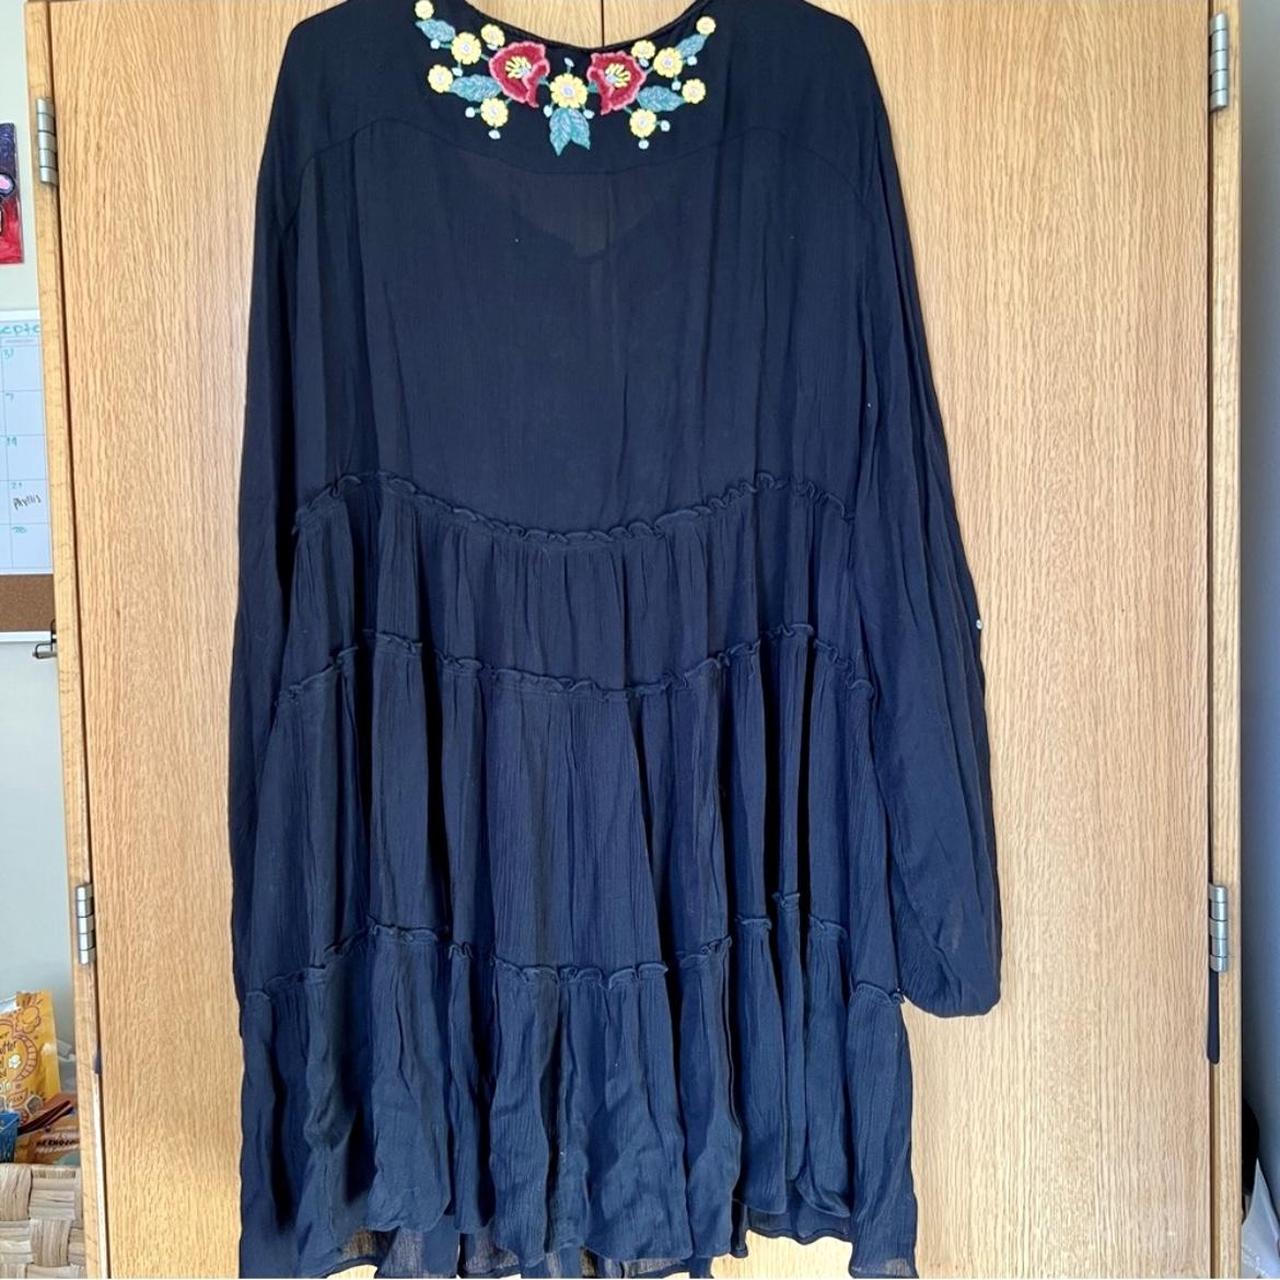 Damage: some wear in spots (loose threads) and a... - Depop